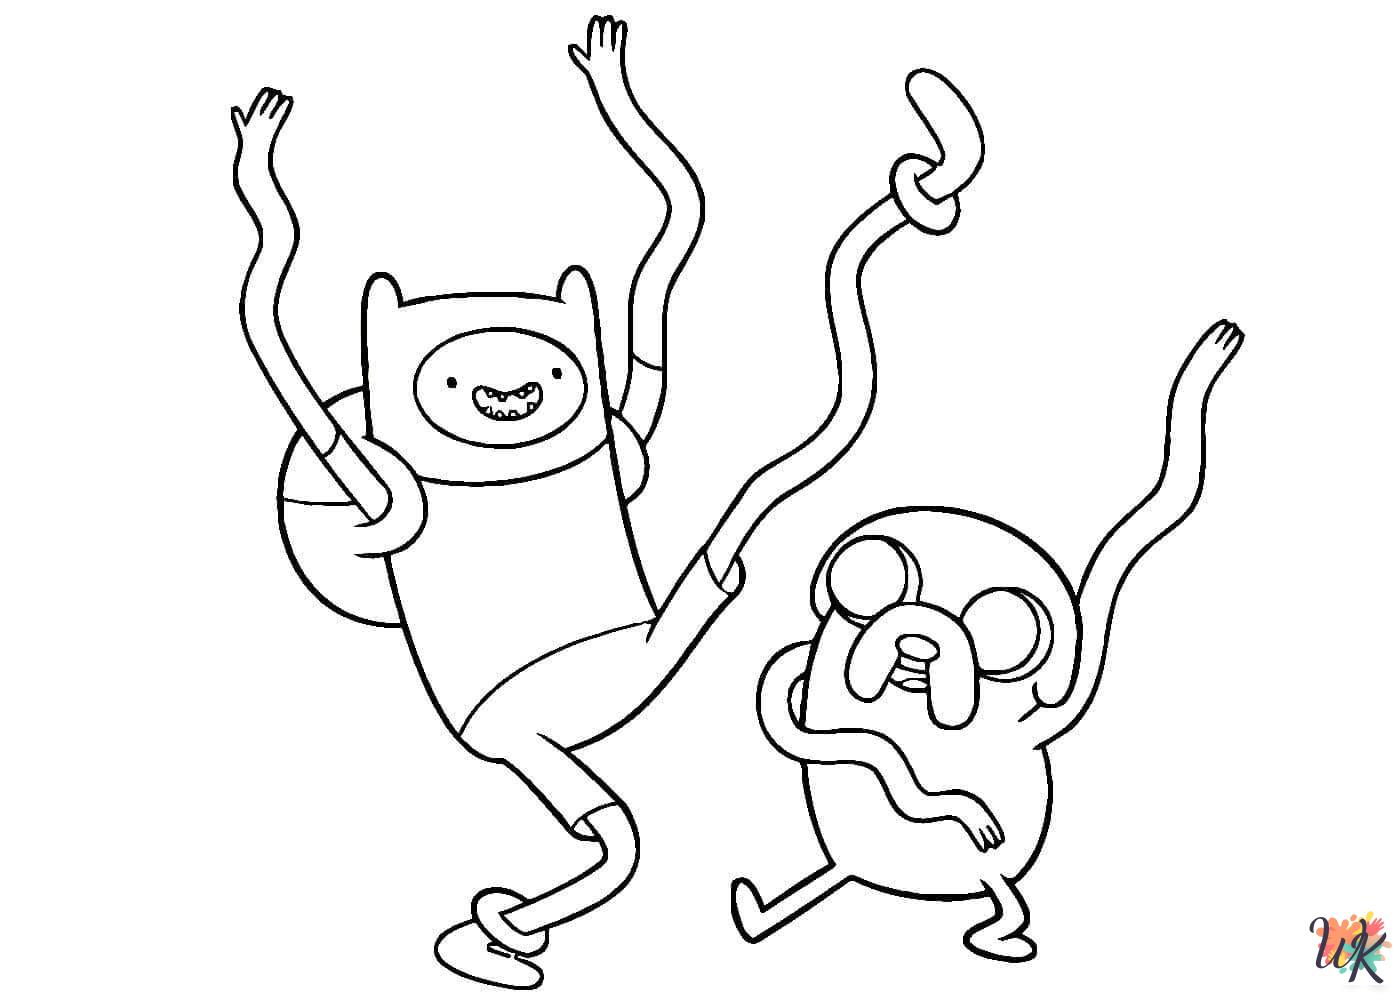 grinch Adventure Time coloring pages